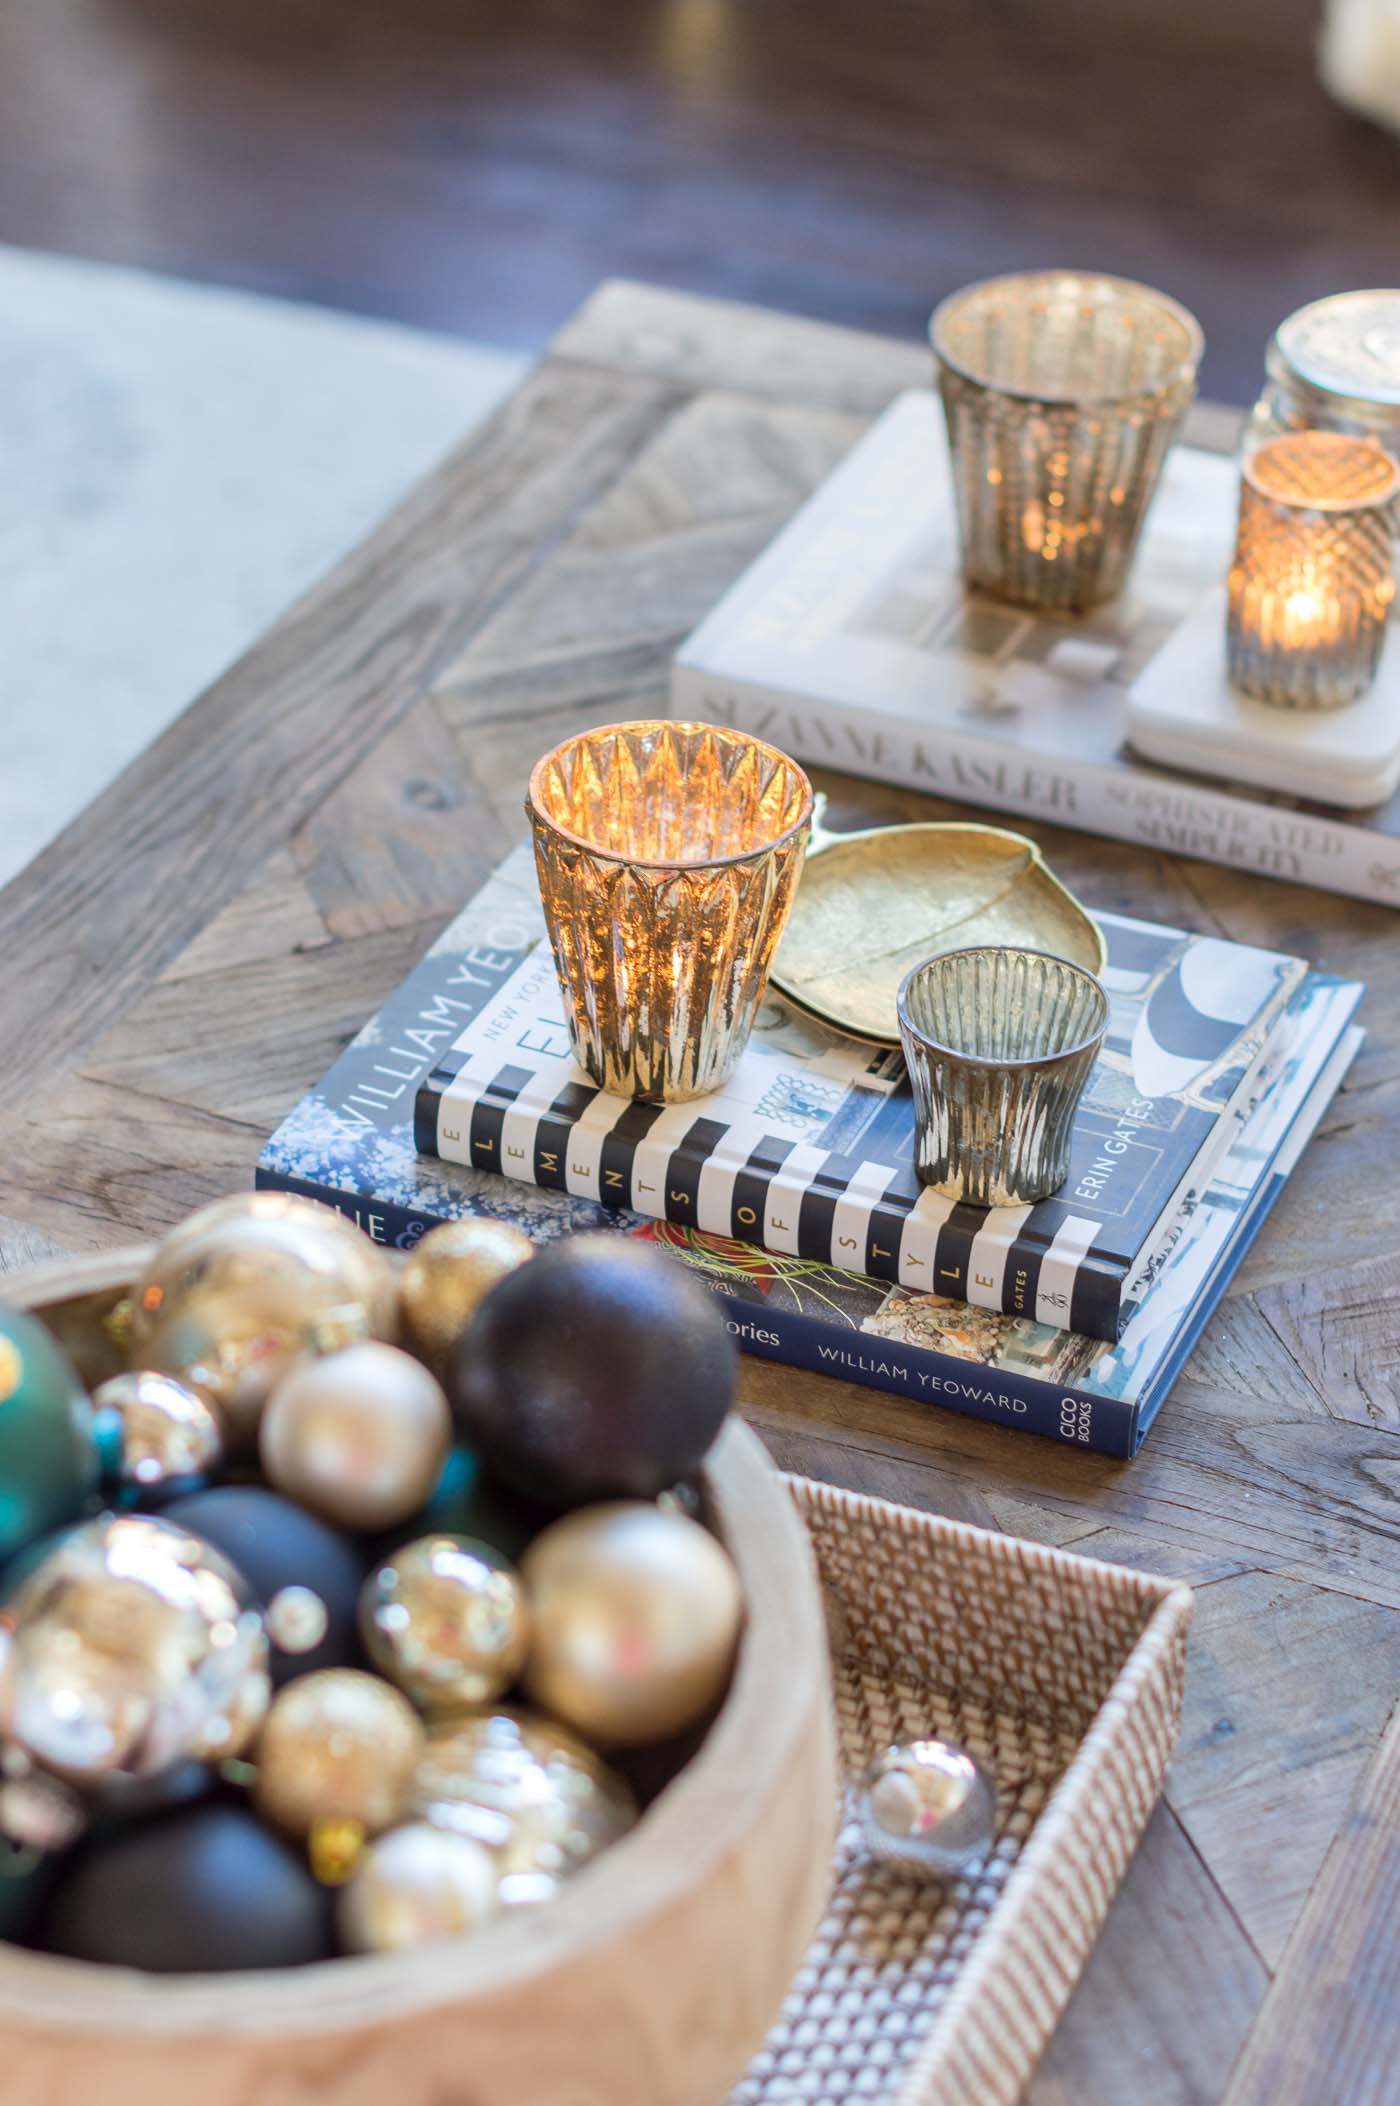 How to decorate a coffee table for Christmas